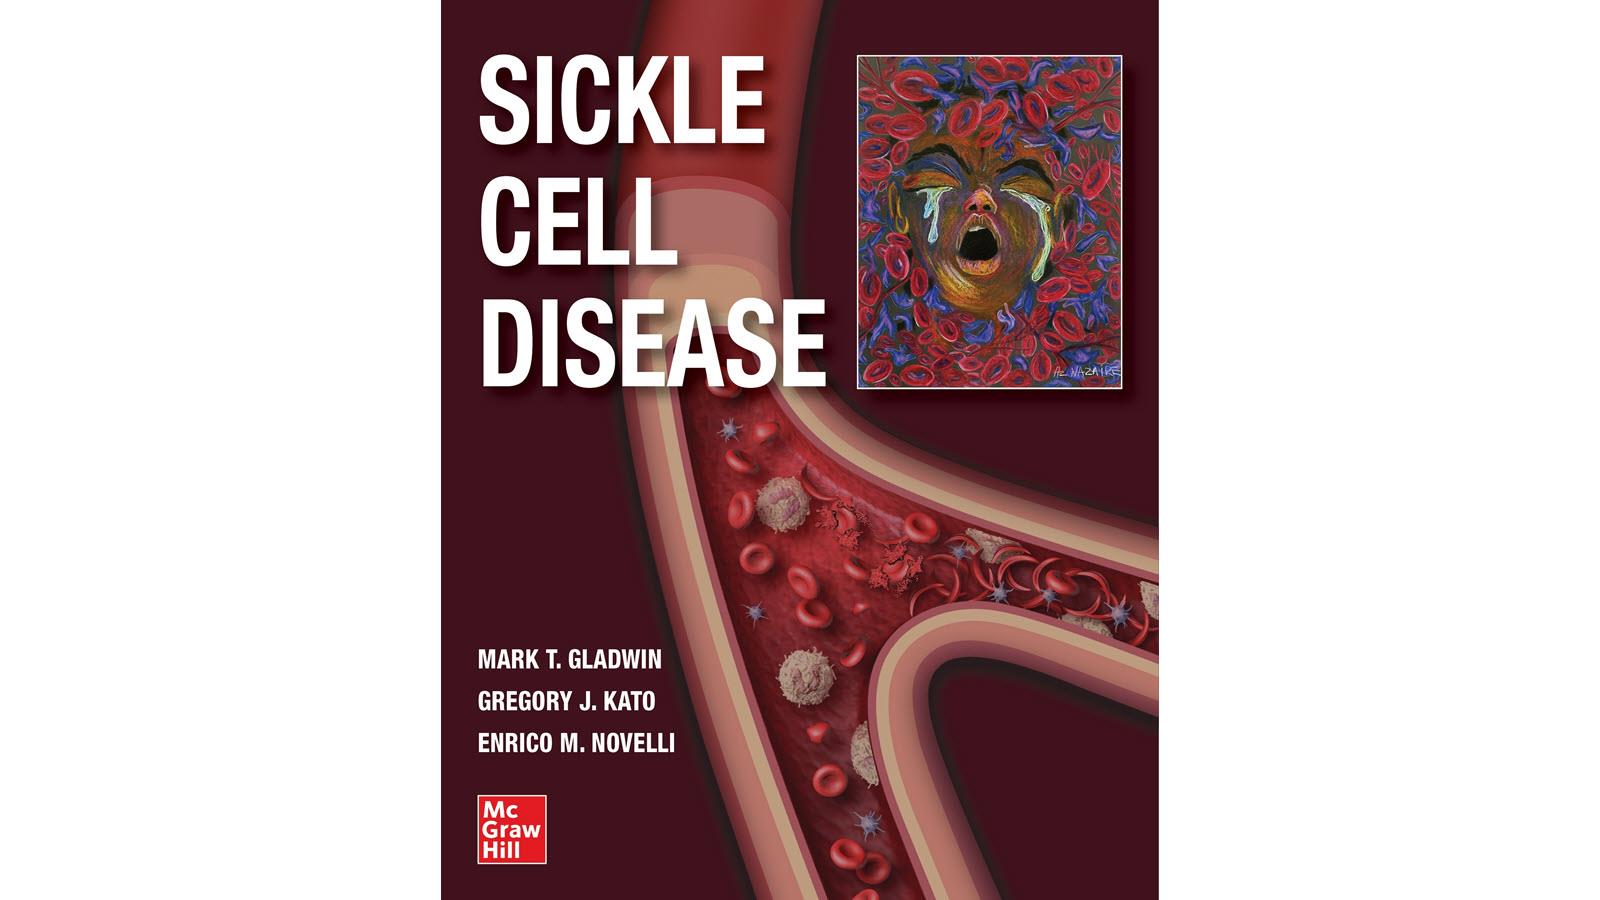 Book cover for a sickle cell disease text book with sickle-shaped blood cells and an illustration of a patient in pain